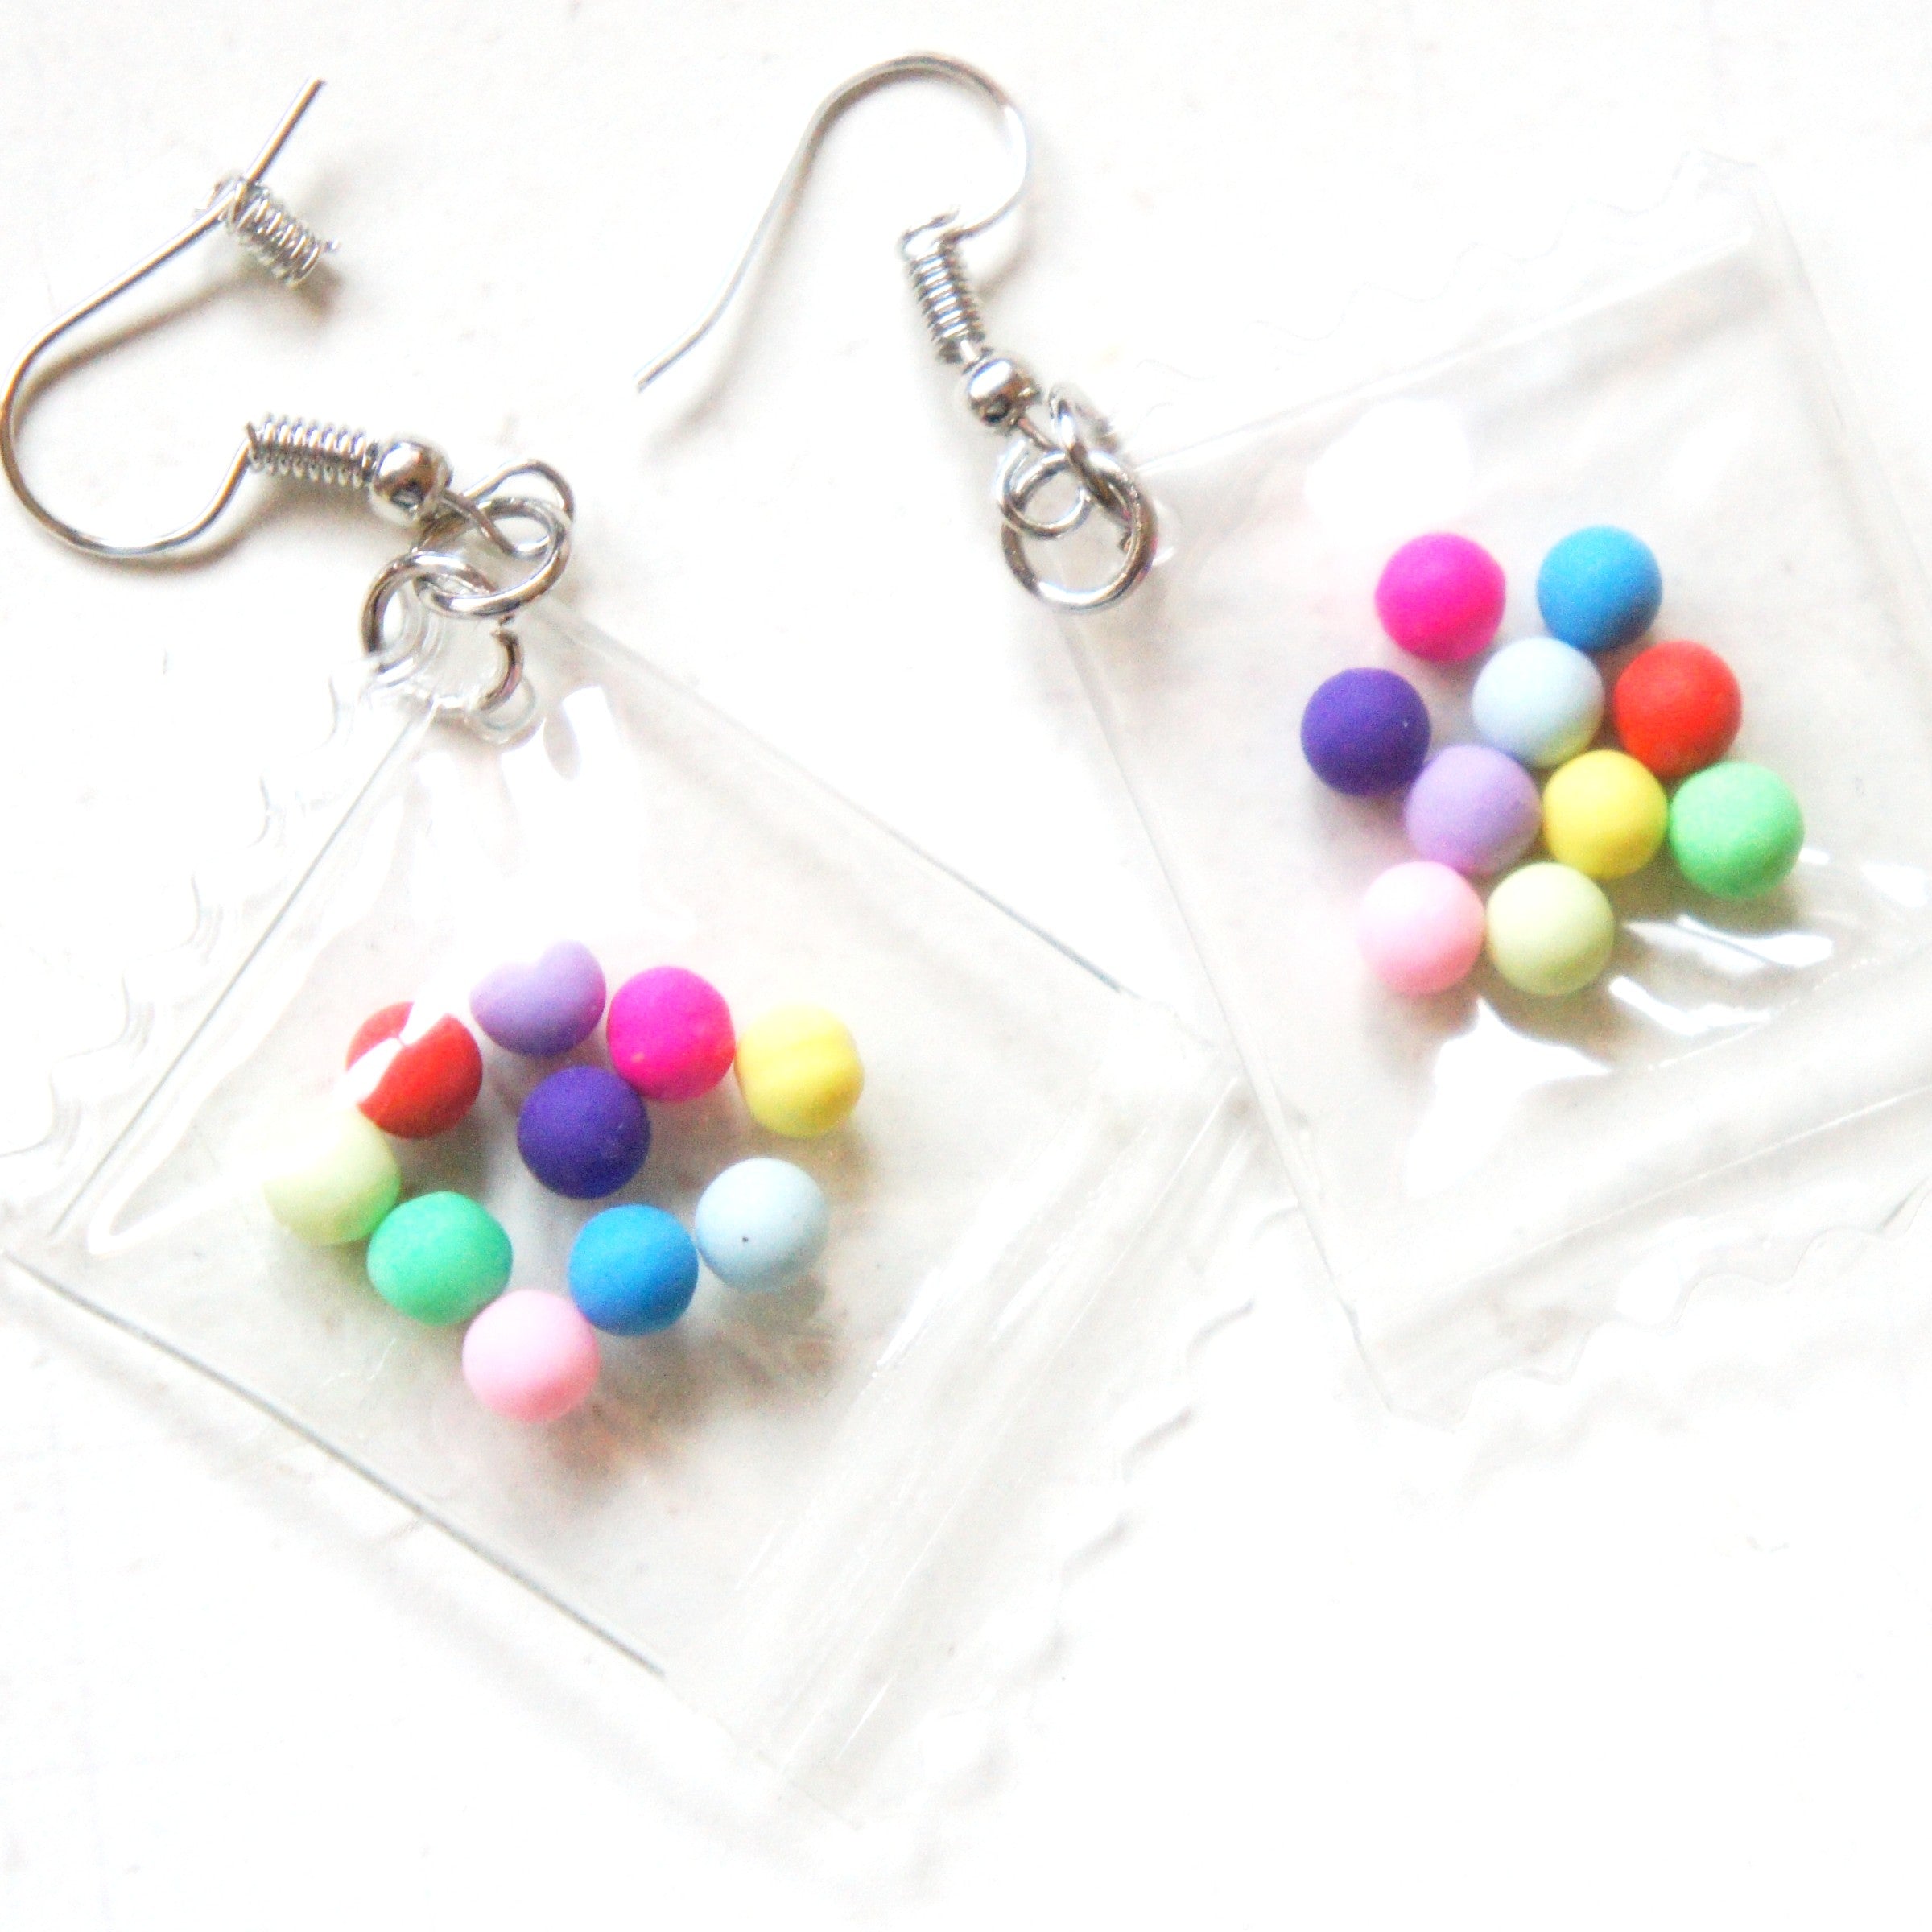 Gum Ball Bags Dangle Earrings - Jillicious charms and accessories